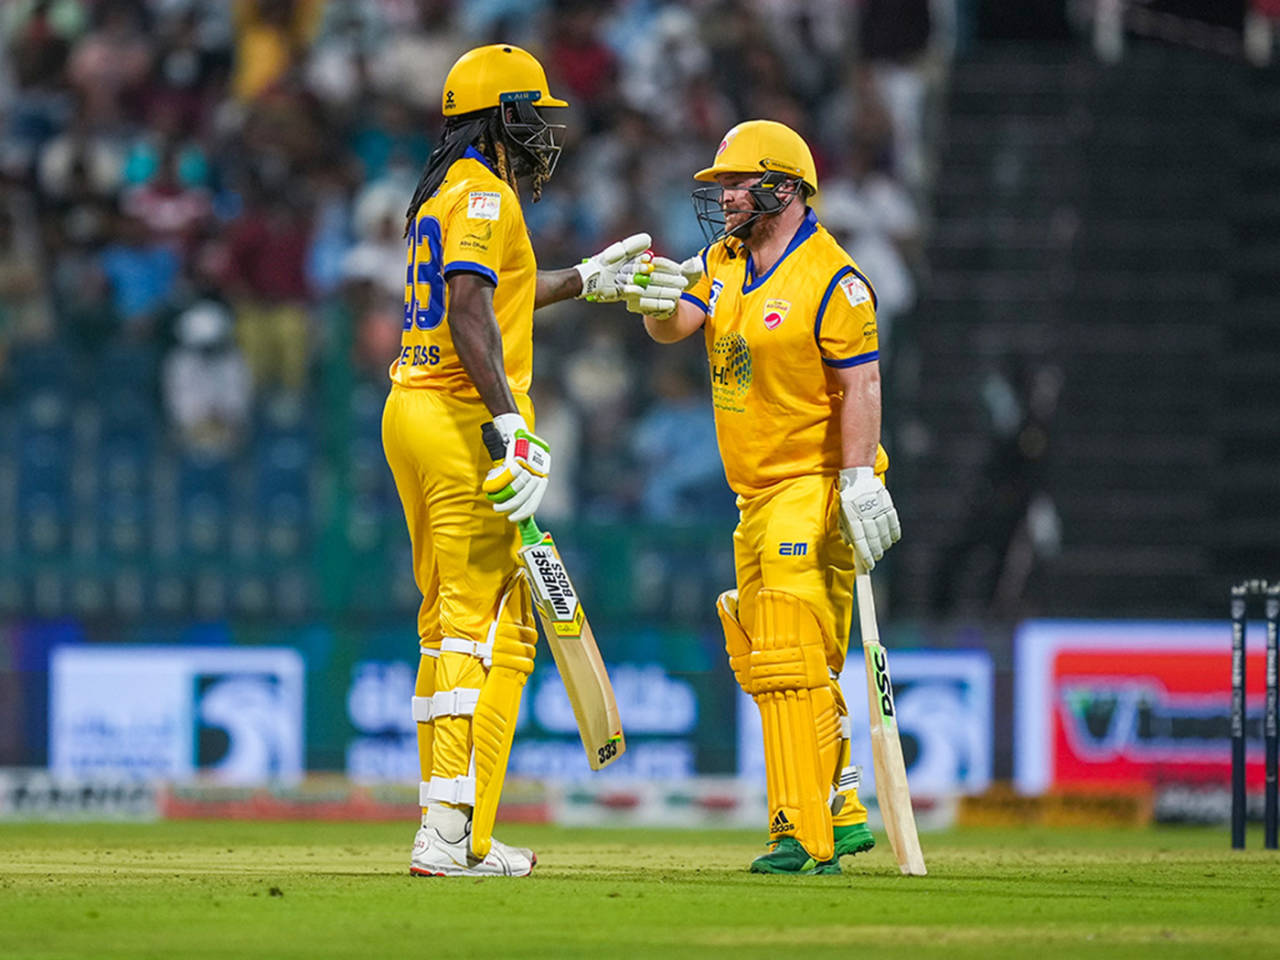 Chris Gayle and Paul Stirling put on 97 for the fourth wicket&nbsp;&nbsp;&bull;&nbsp;&nbsp;Abu Dhabi T10